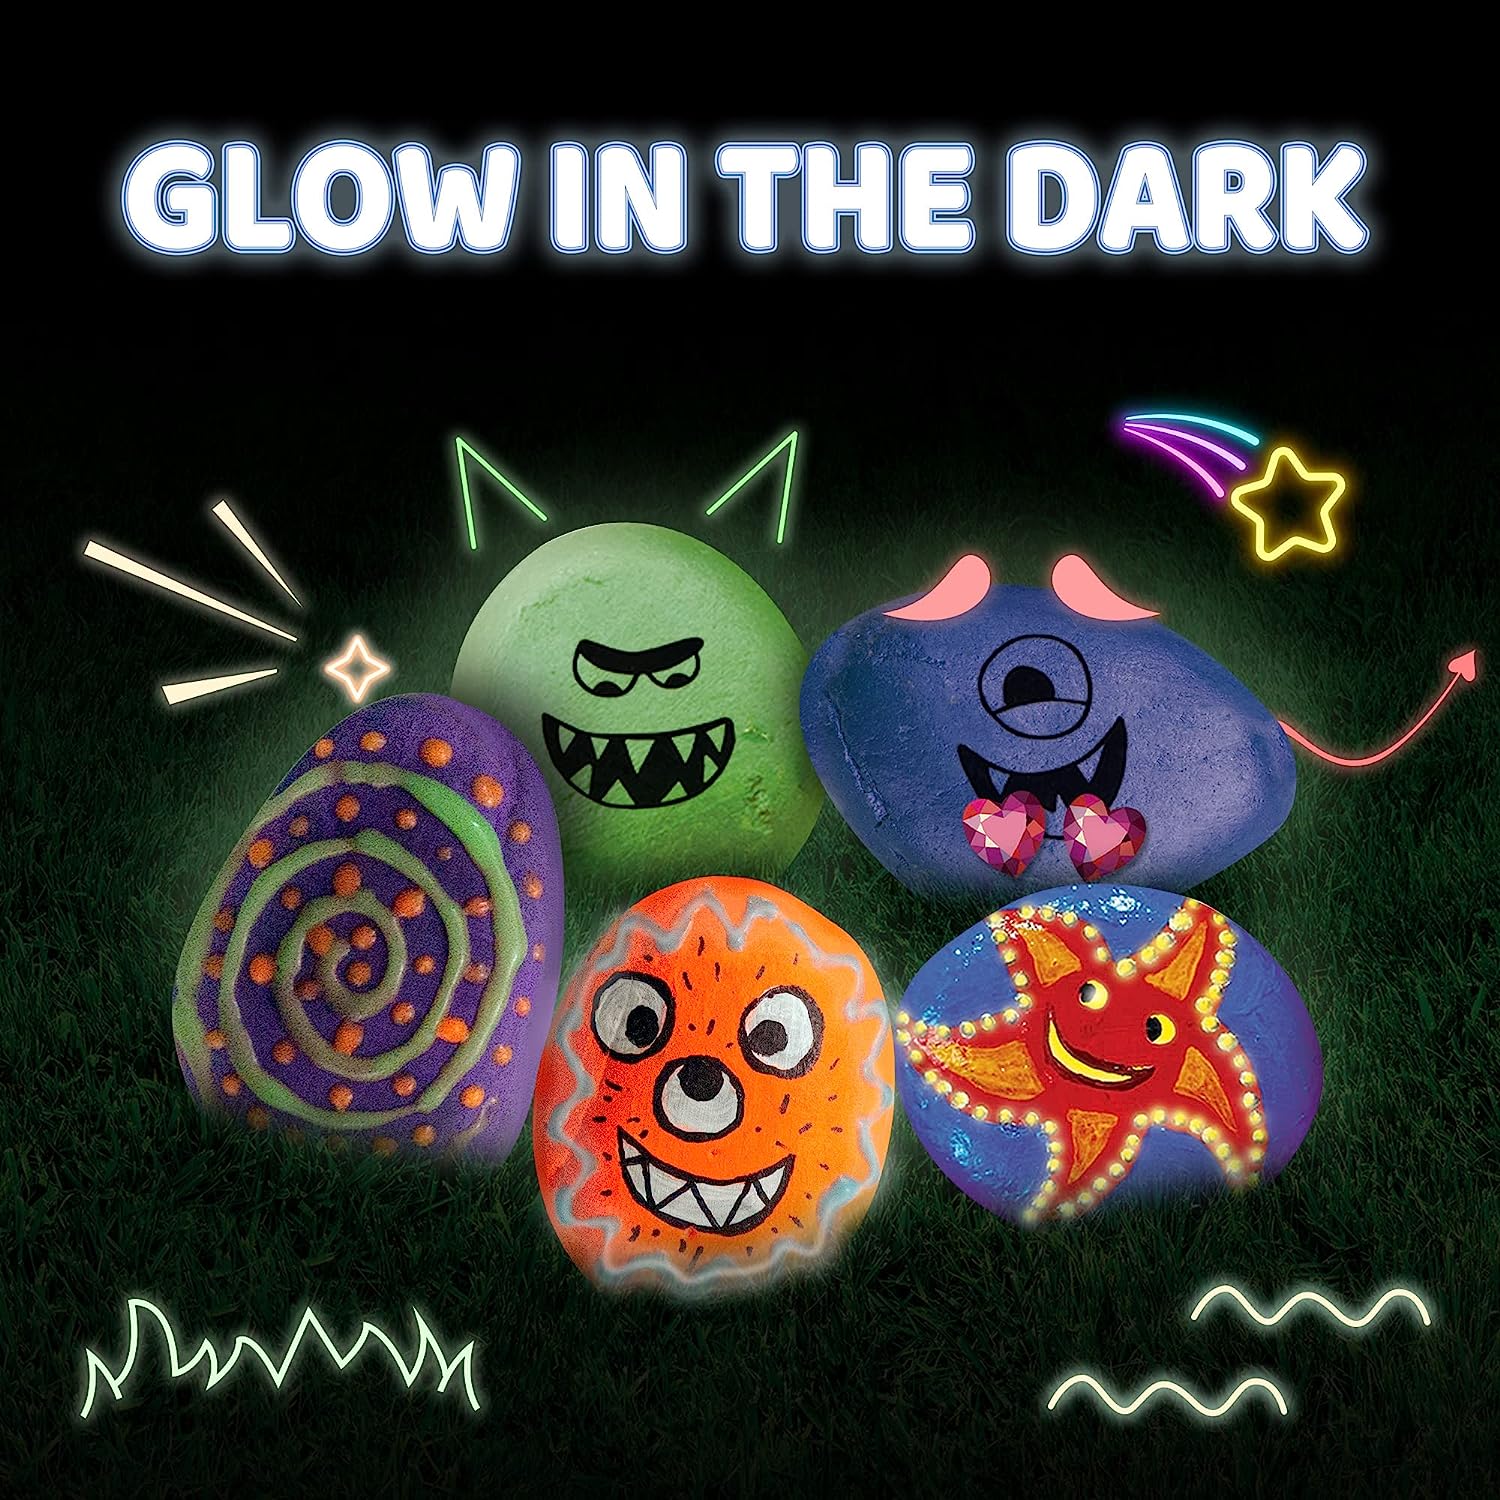 Several rocks painted like monsters using a glow in the dark rock painting kit for kids.